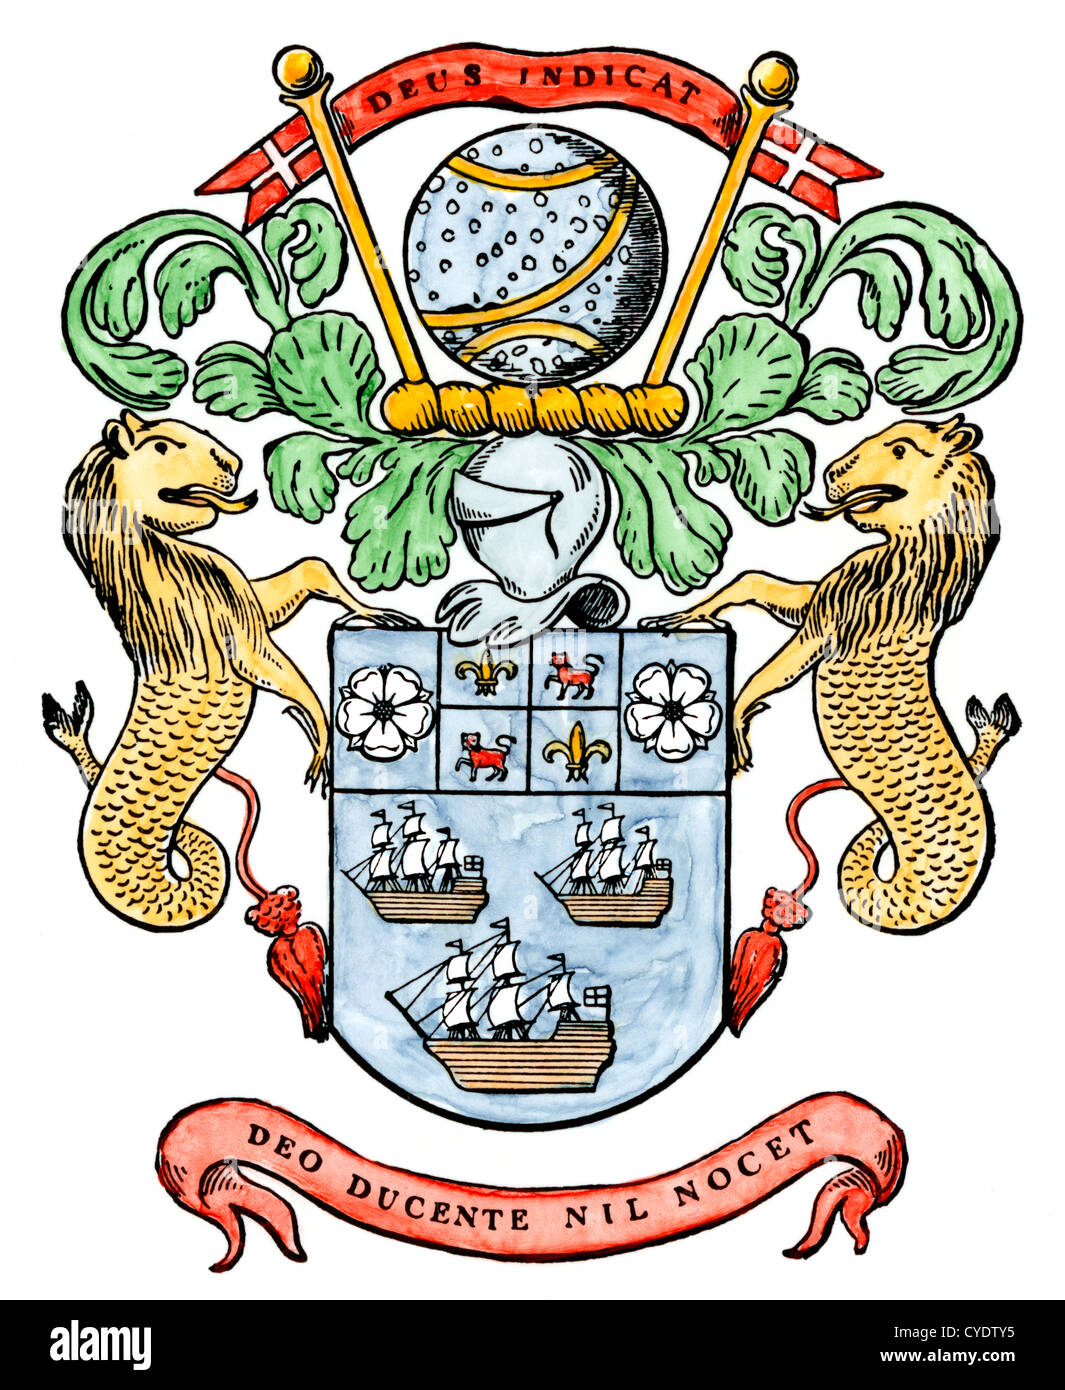 Original coat-of-arms of the British East India Company, Incorporated in 1600. Hand-colored woodcut Stock Photo